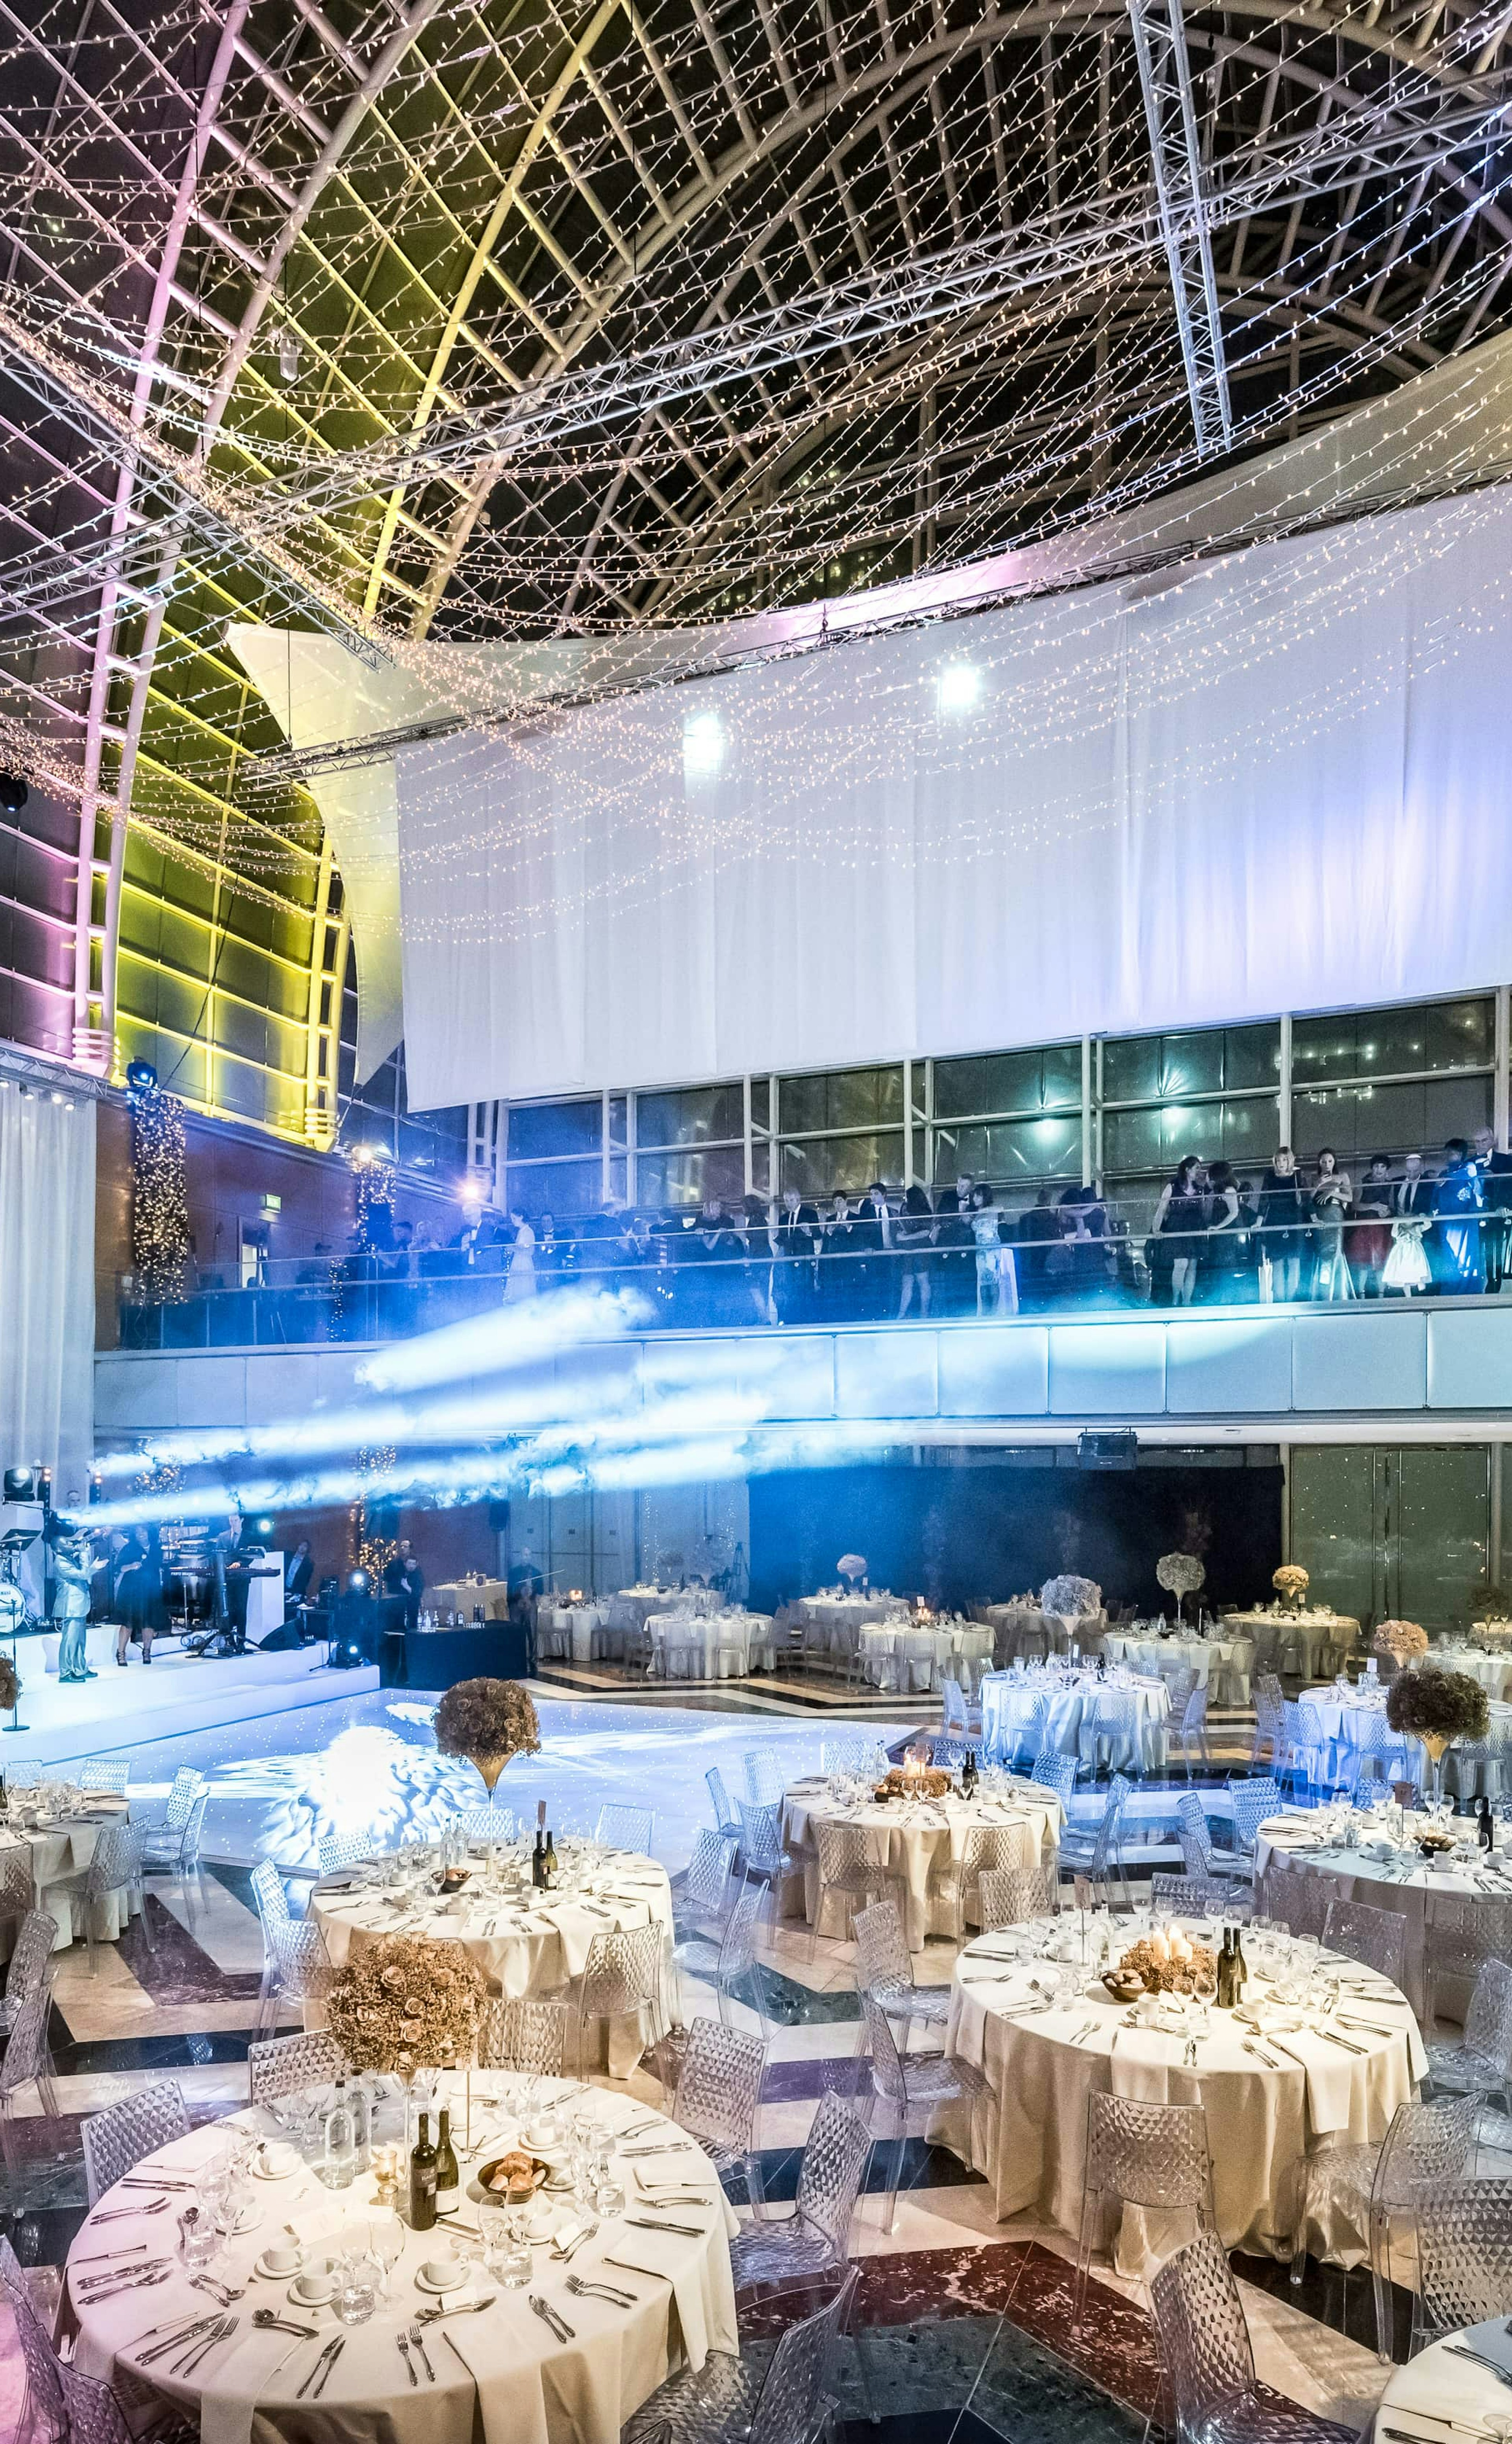 Large Conference Venues - East Wintergarden 